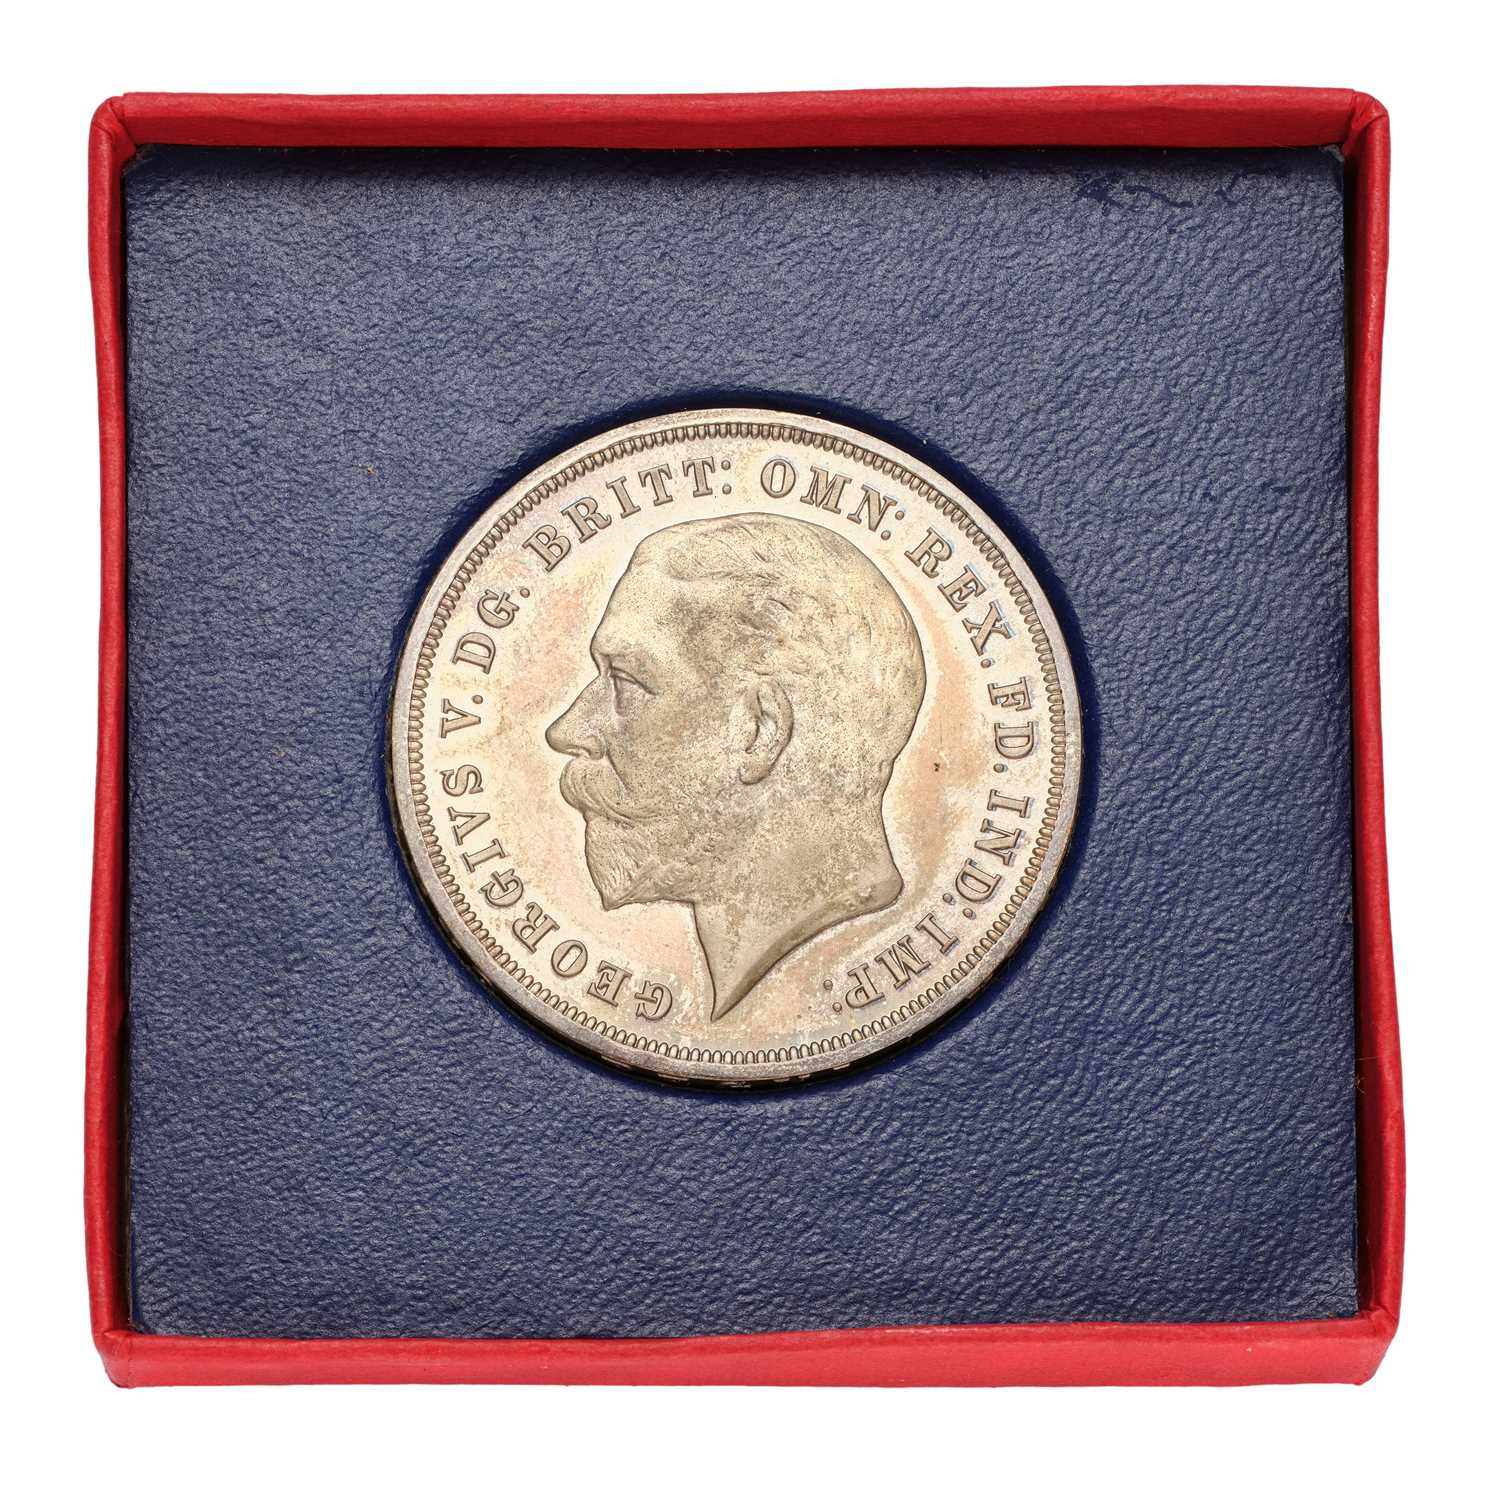 George V, Proof Crown 1935, raised edge lettering (Bull 3655, ESC 378, S.4050) one of only 2,500 - Image 3 of 8